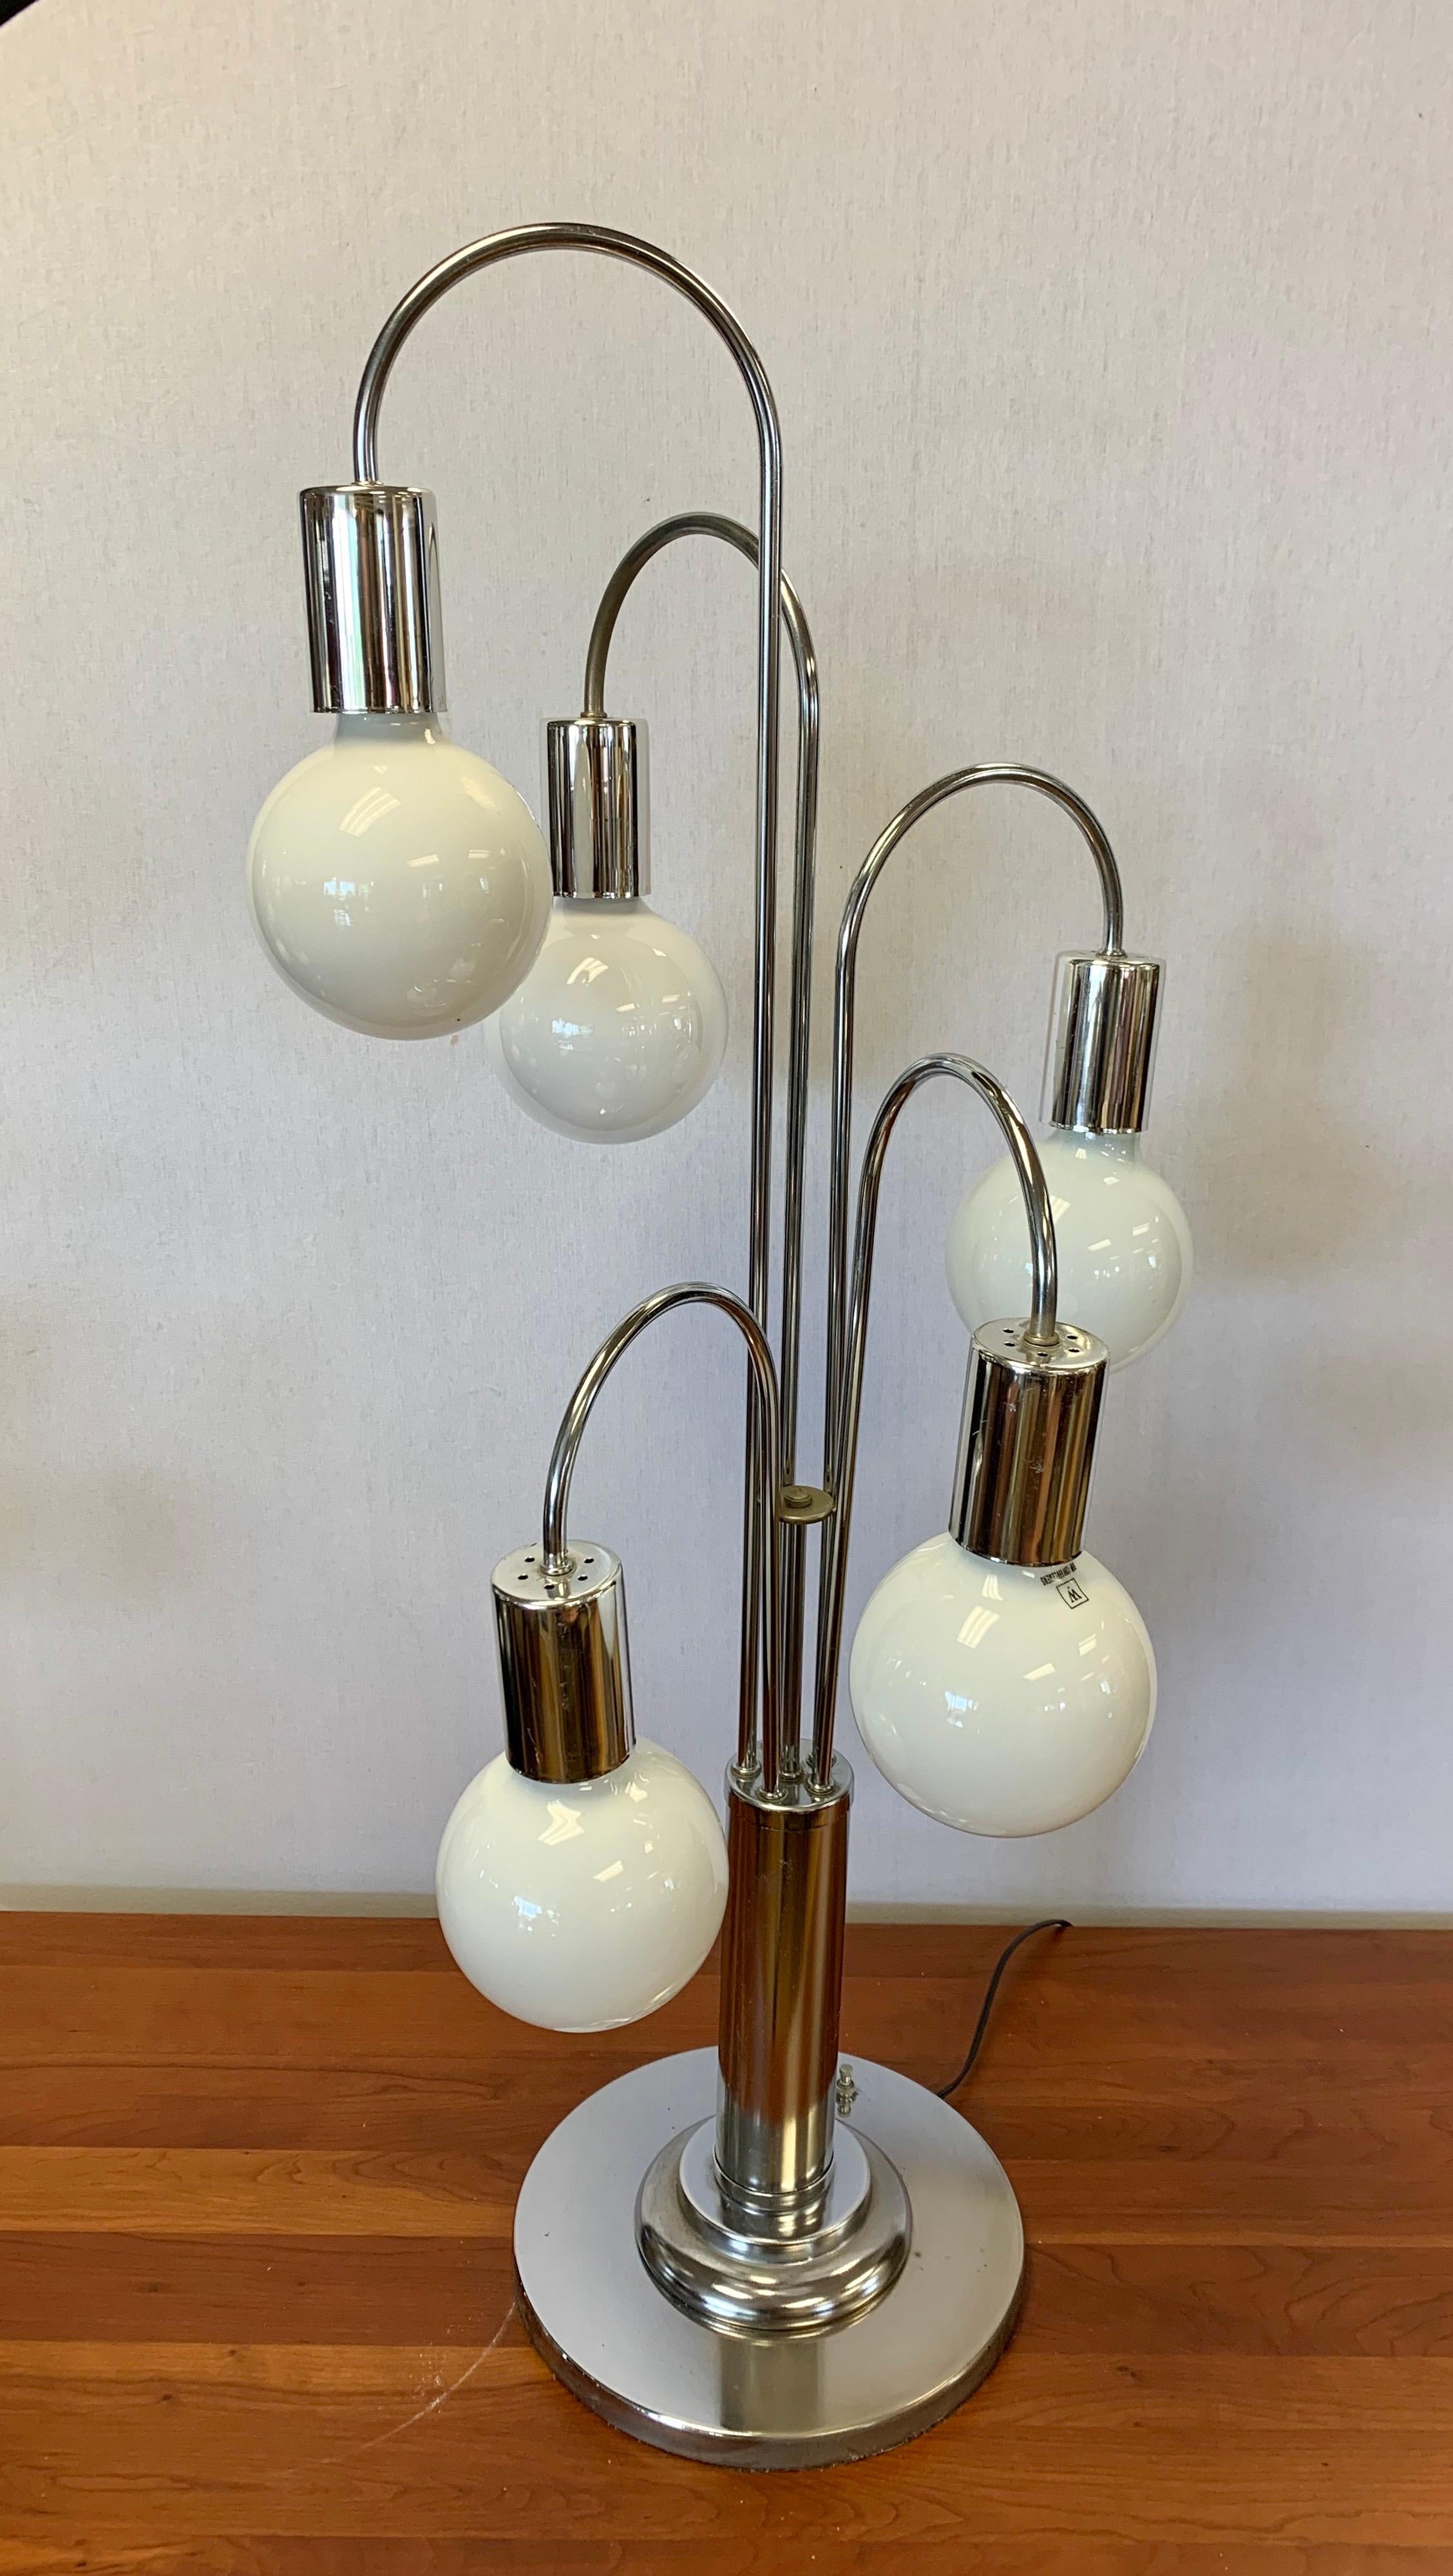 Rare Laurel lamp Company large chrome waterfall table lamp. There are five lights and this piece is made to look a cascading chandelier. It is forty inches tall and nothing short of magnificent. Made and wired in USA and everything works as it